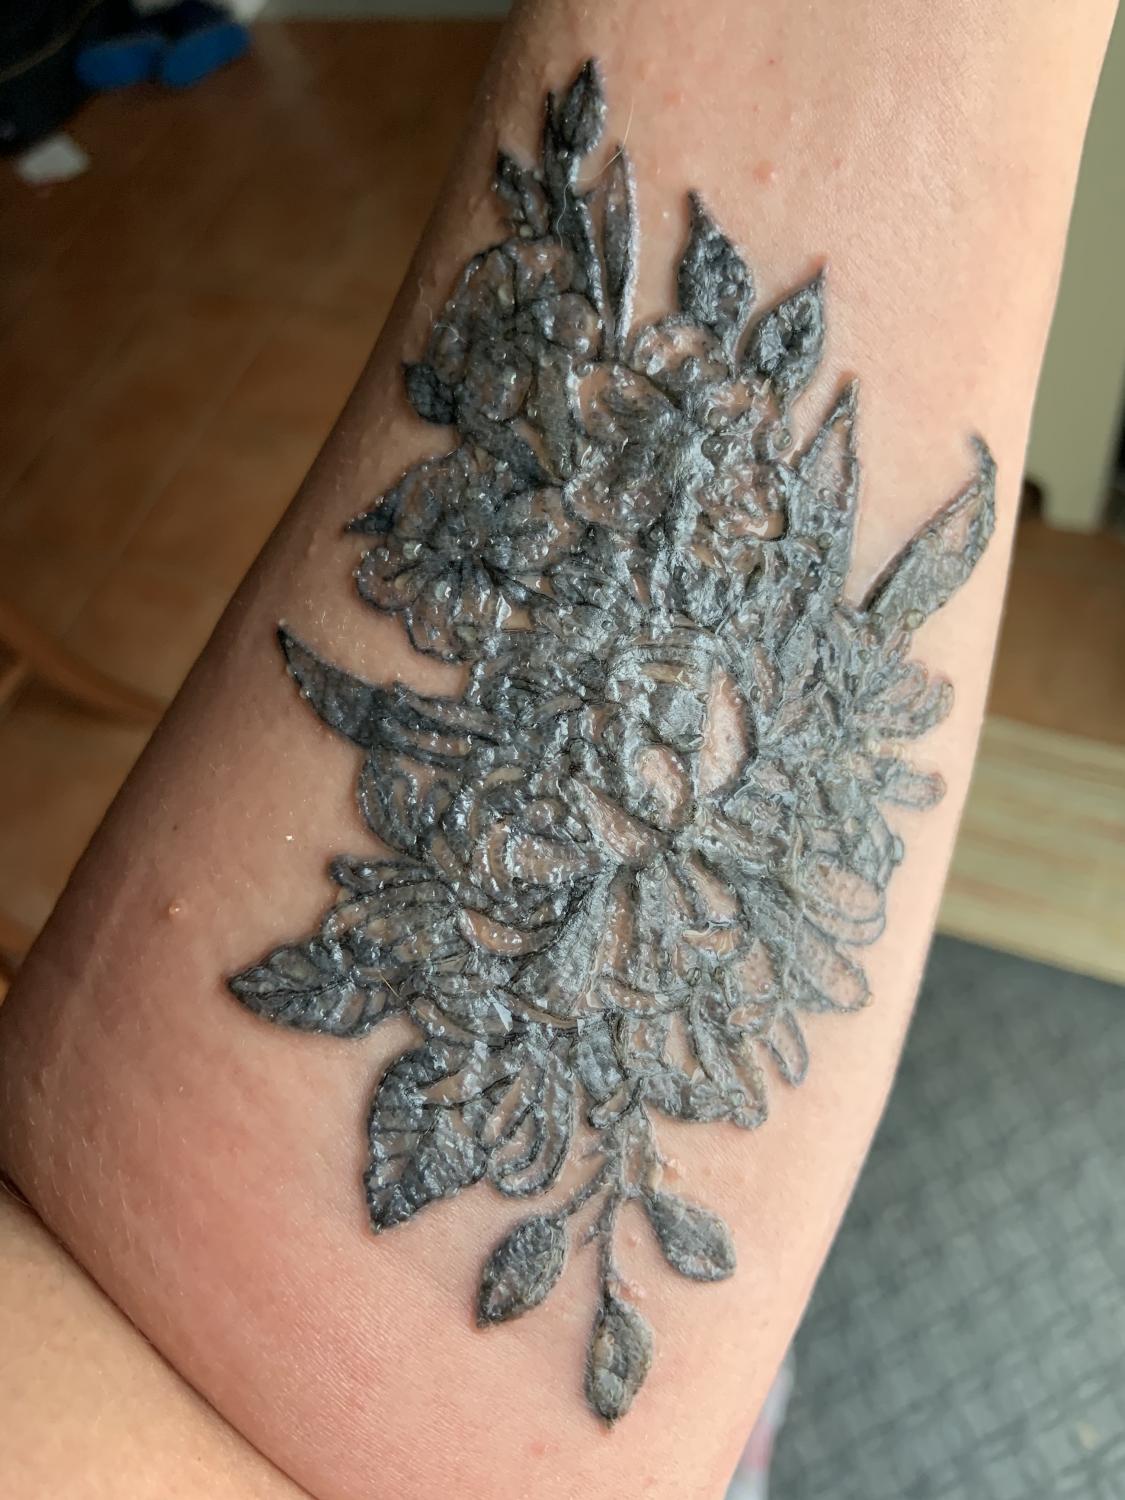 I just got this tattoo done the day before yesterday does the healing look  normal  rTattooDesigns